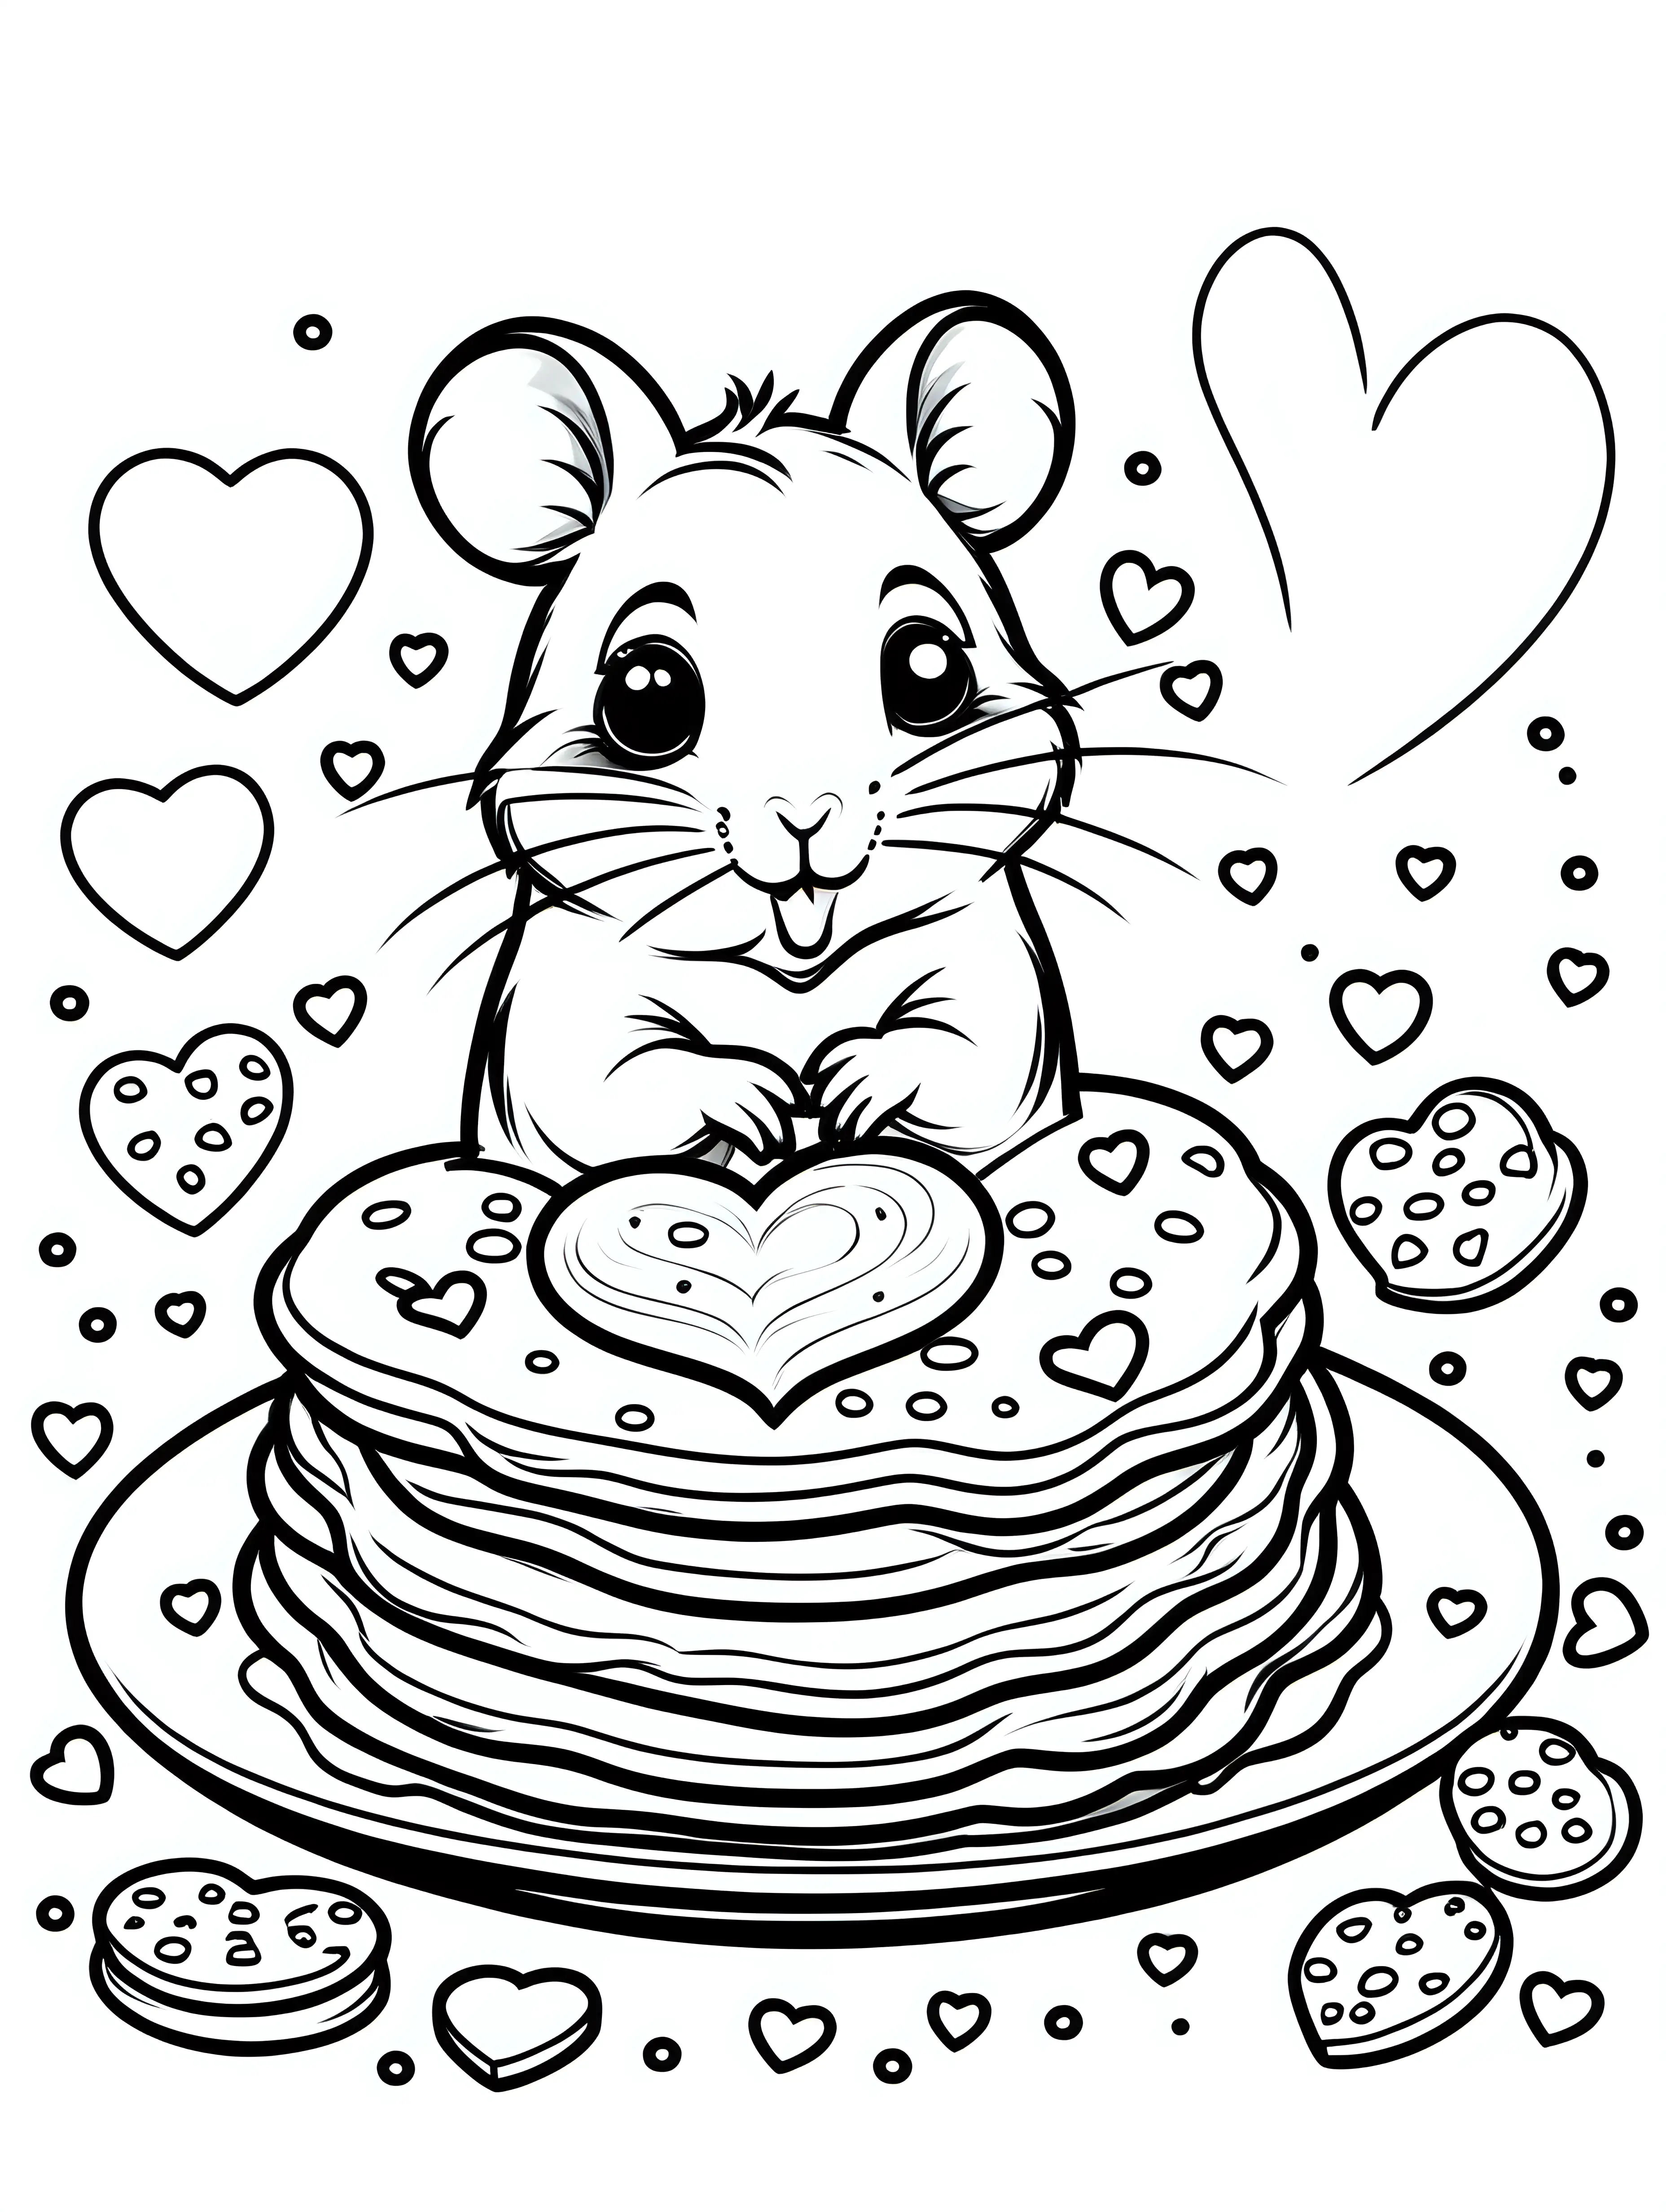 create a black line illustration children's coloring page of cute hamsters eating heart shaped pancakes. The pancakes are topped with whipped cream and heart sprinkles. Use crisp black outlines, no shading. 